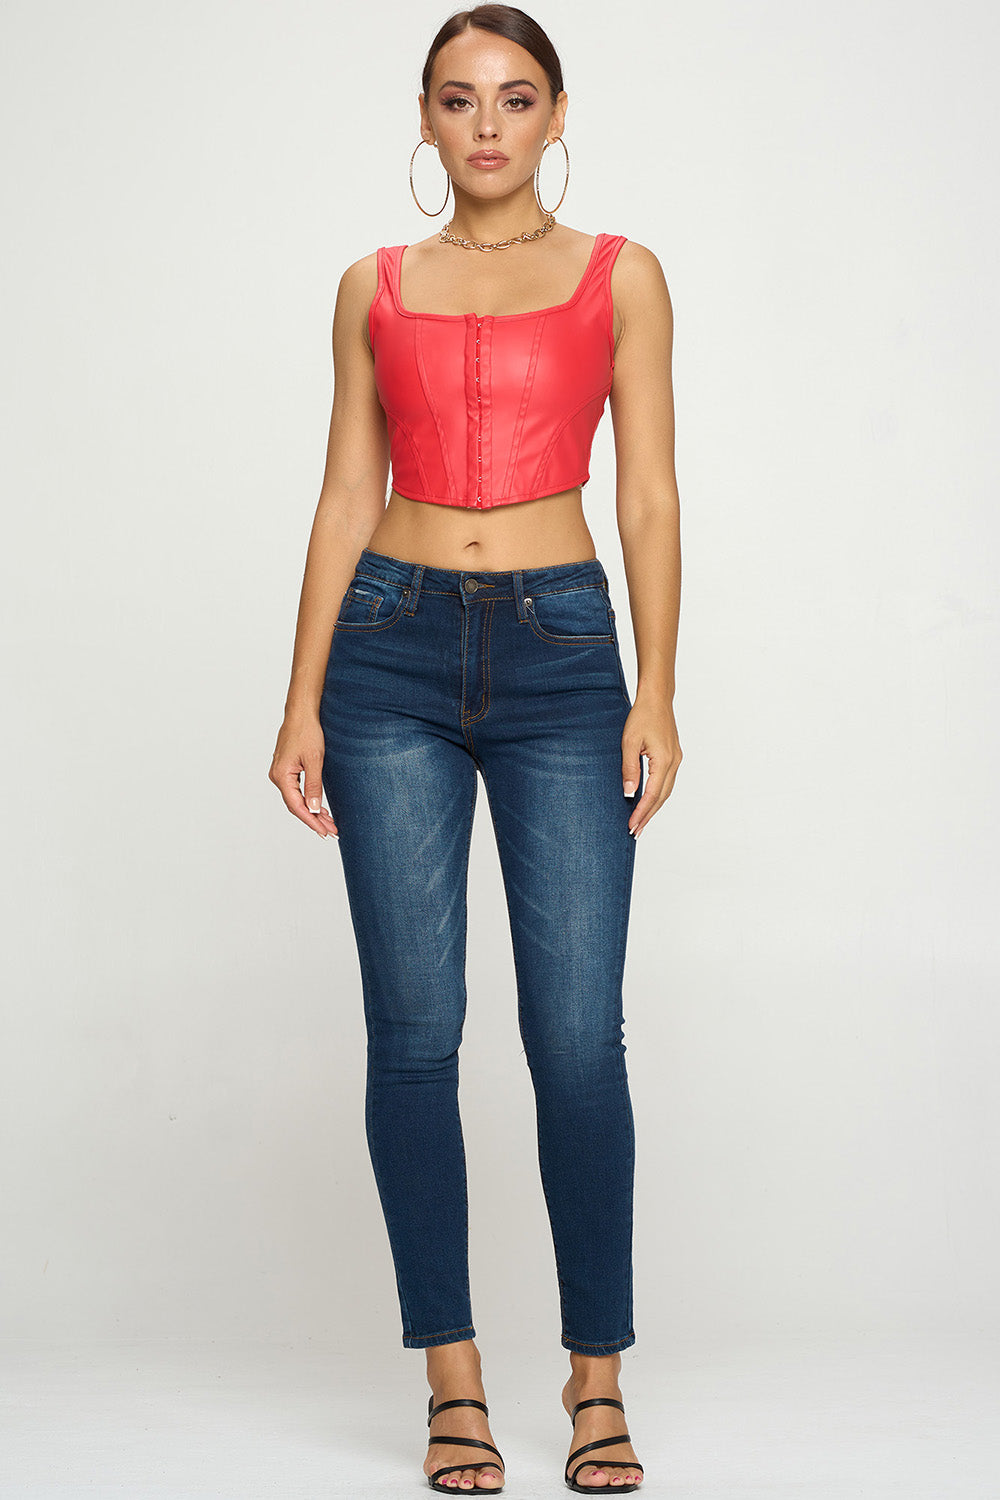 SOLID EYELET FRONT CLOSURE CORSET CROP TOP – OhYes Fashion